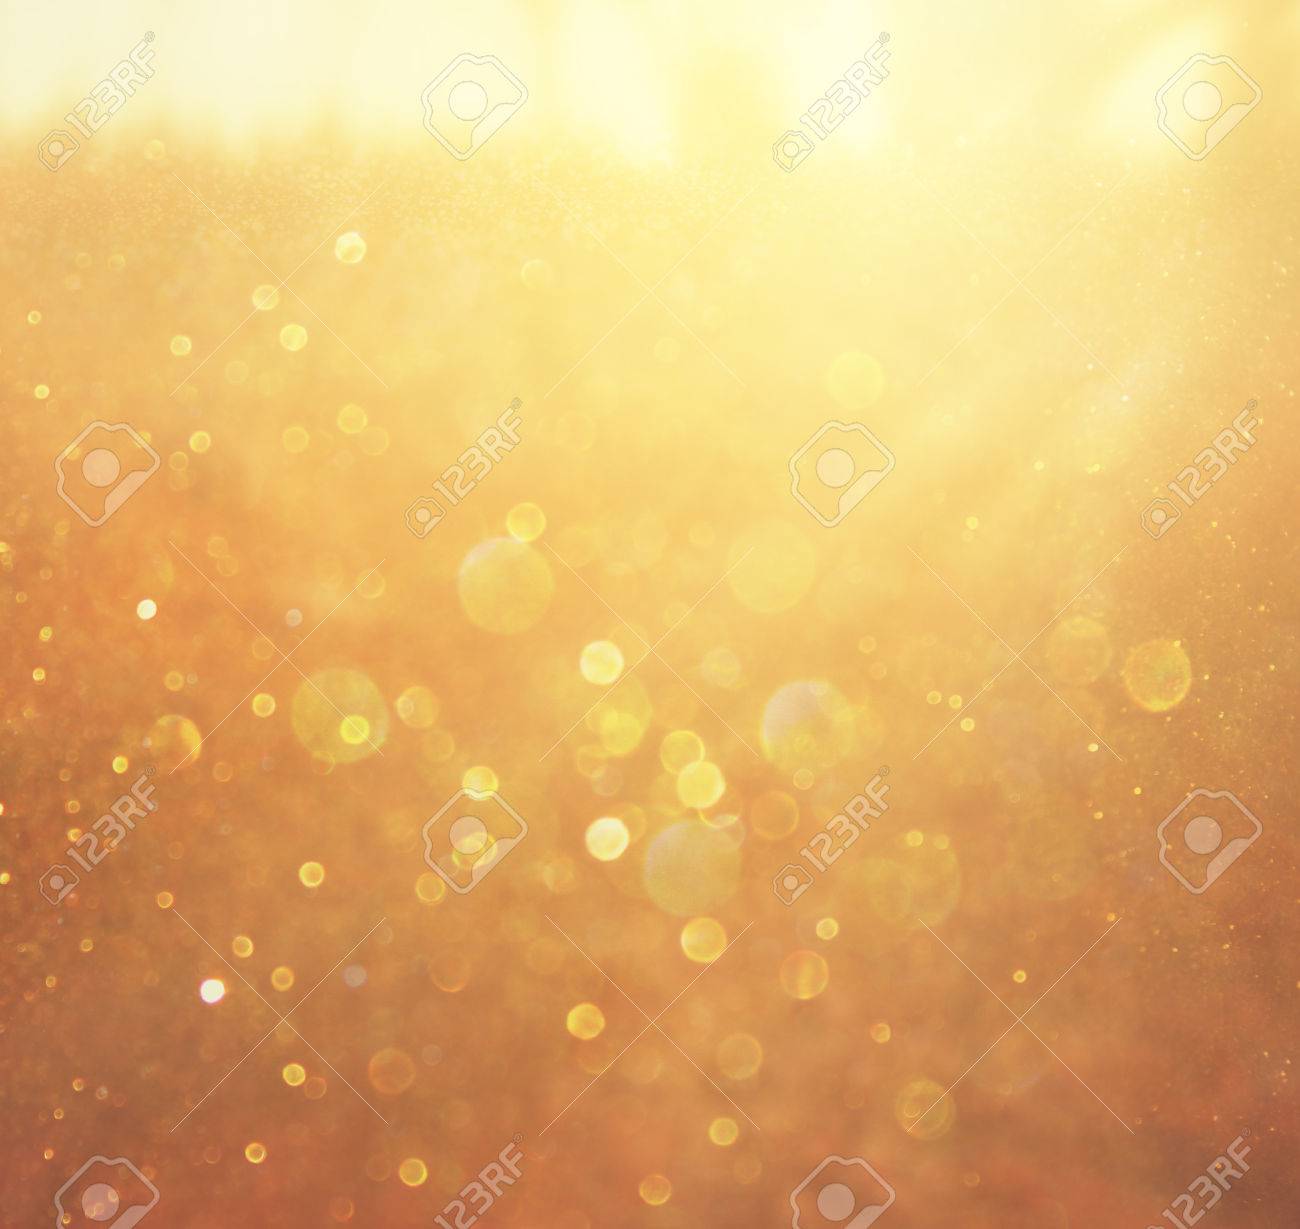 Gold And Warm Abstract Bokeh Lights Defocused Background Stock